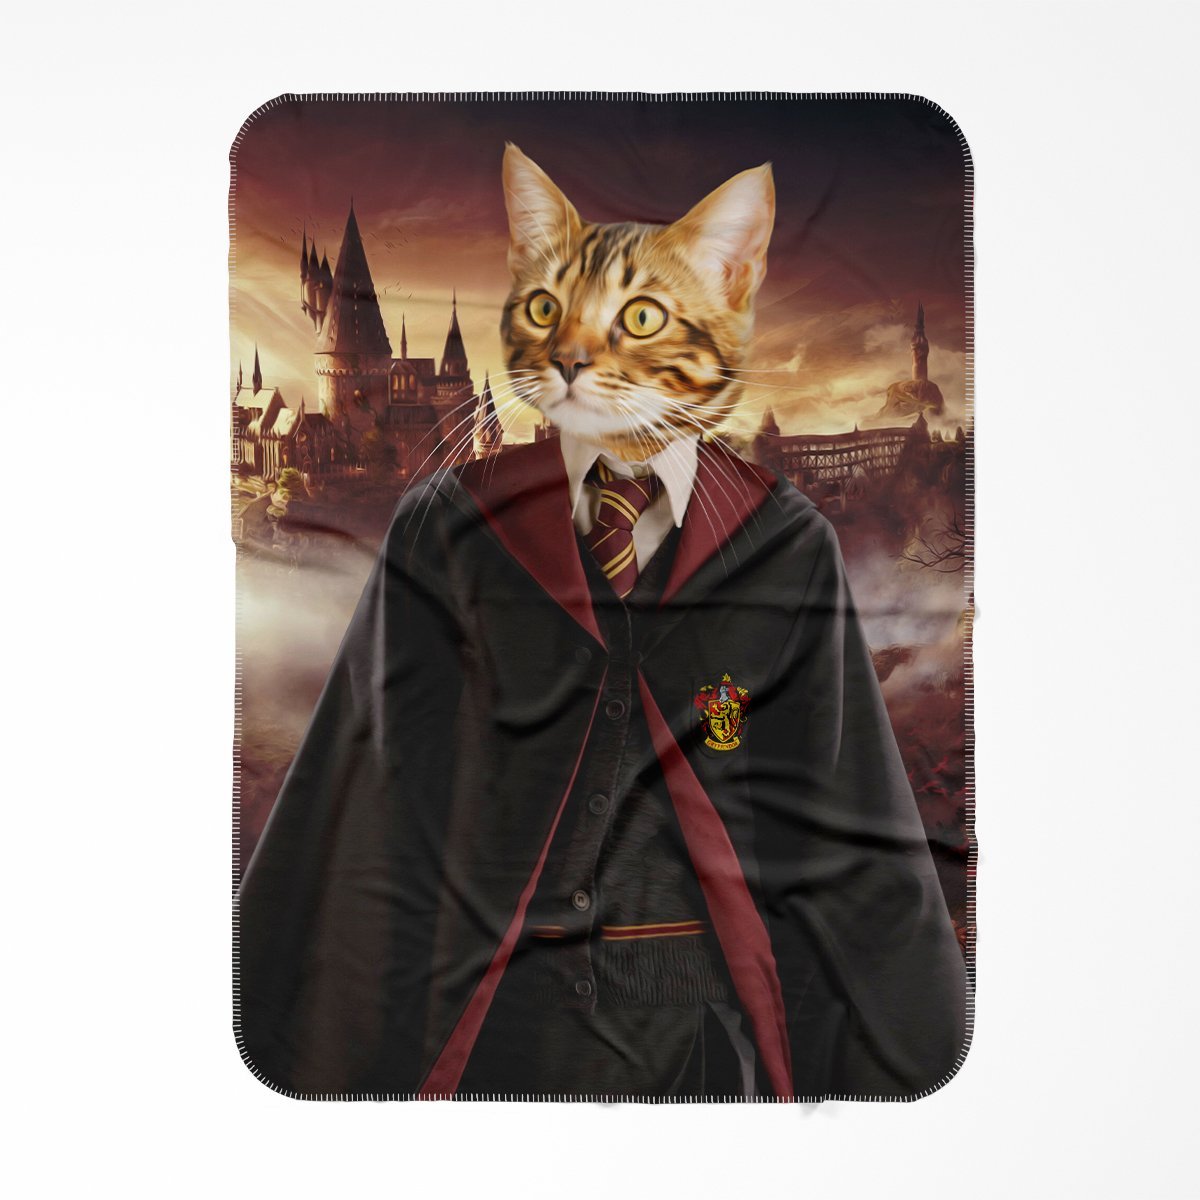 Gryffindor (Harry Potter Inspired): Custom Pet Blanket - Paw & Glory - #pet portraits# - #dog portraits# - #pet portraits uk#Paw and glory, Pet portraits blanket,pets face on a blanket, blanket with picture of pet, picture of pet on blanket, photo pet blanket, custom dog picture blanket